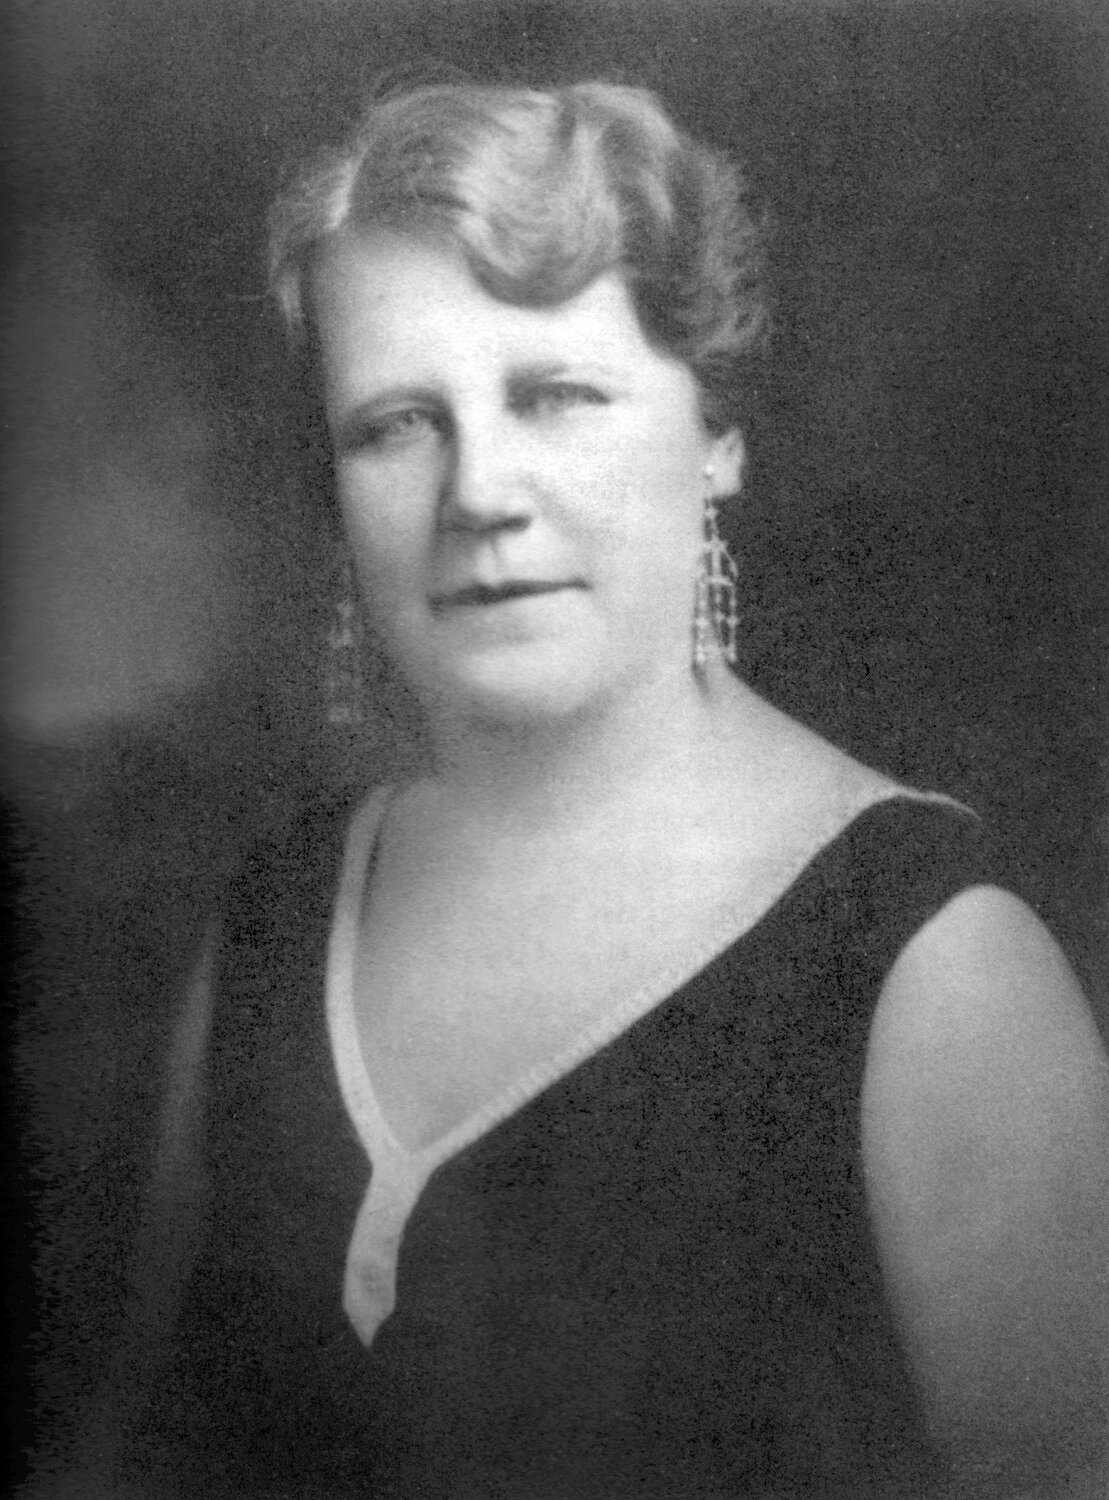 FIRST IN THE STATE: Rhode Island State Representative Isabelle Ahearn O’Neill was a pioneer of women’s rights in the early 20th century. (Photo provided by the Rhode Island Heritage Hall of Fame)